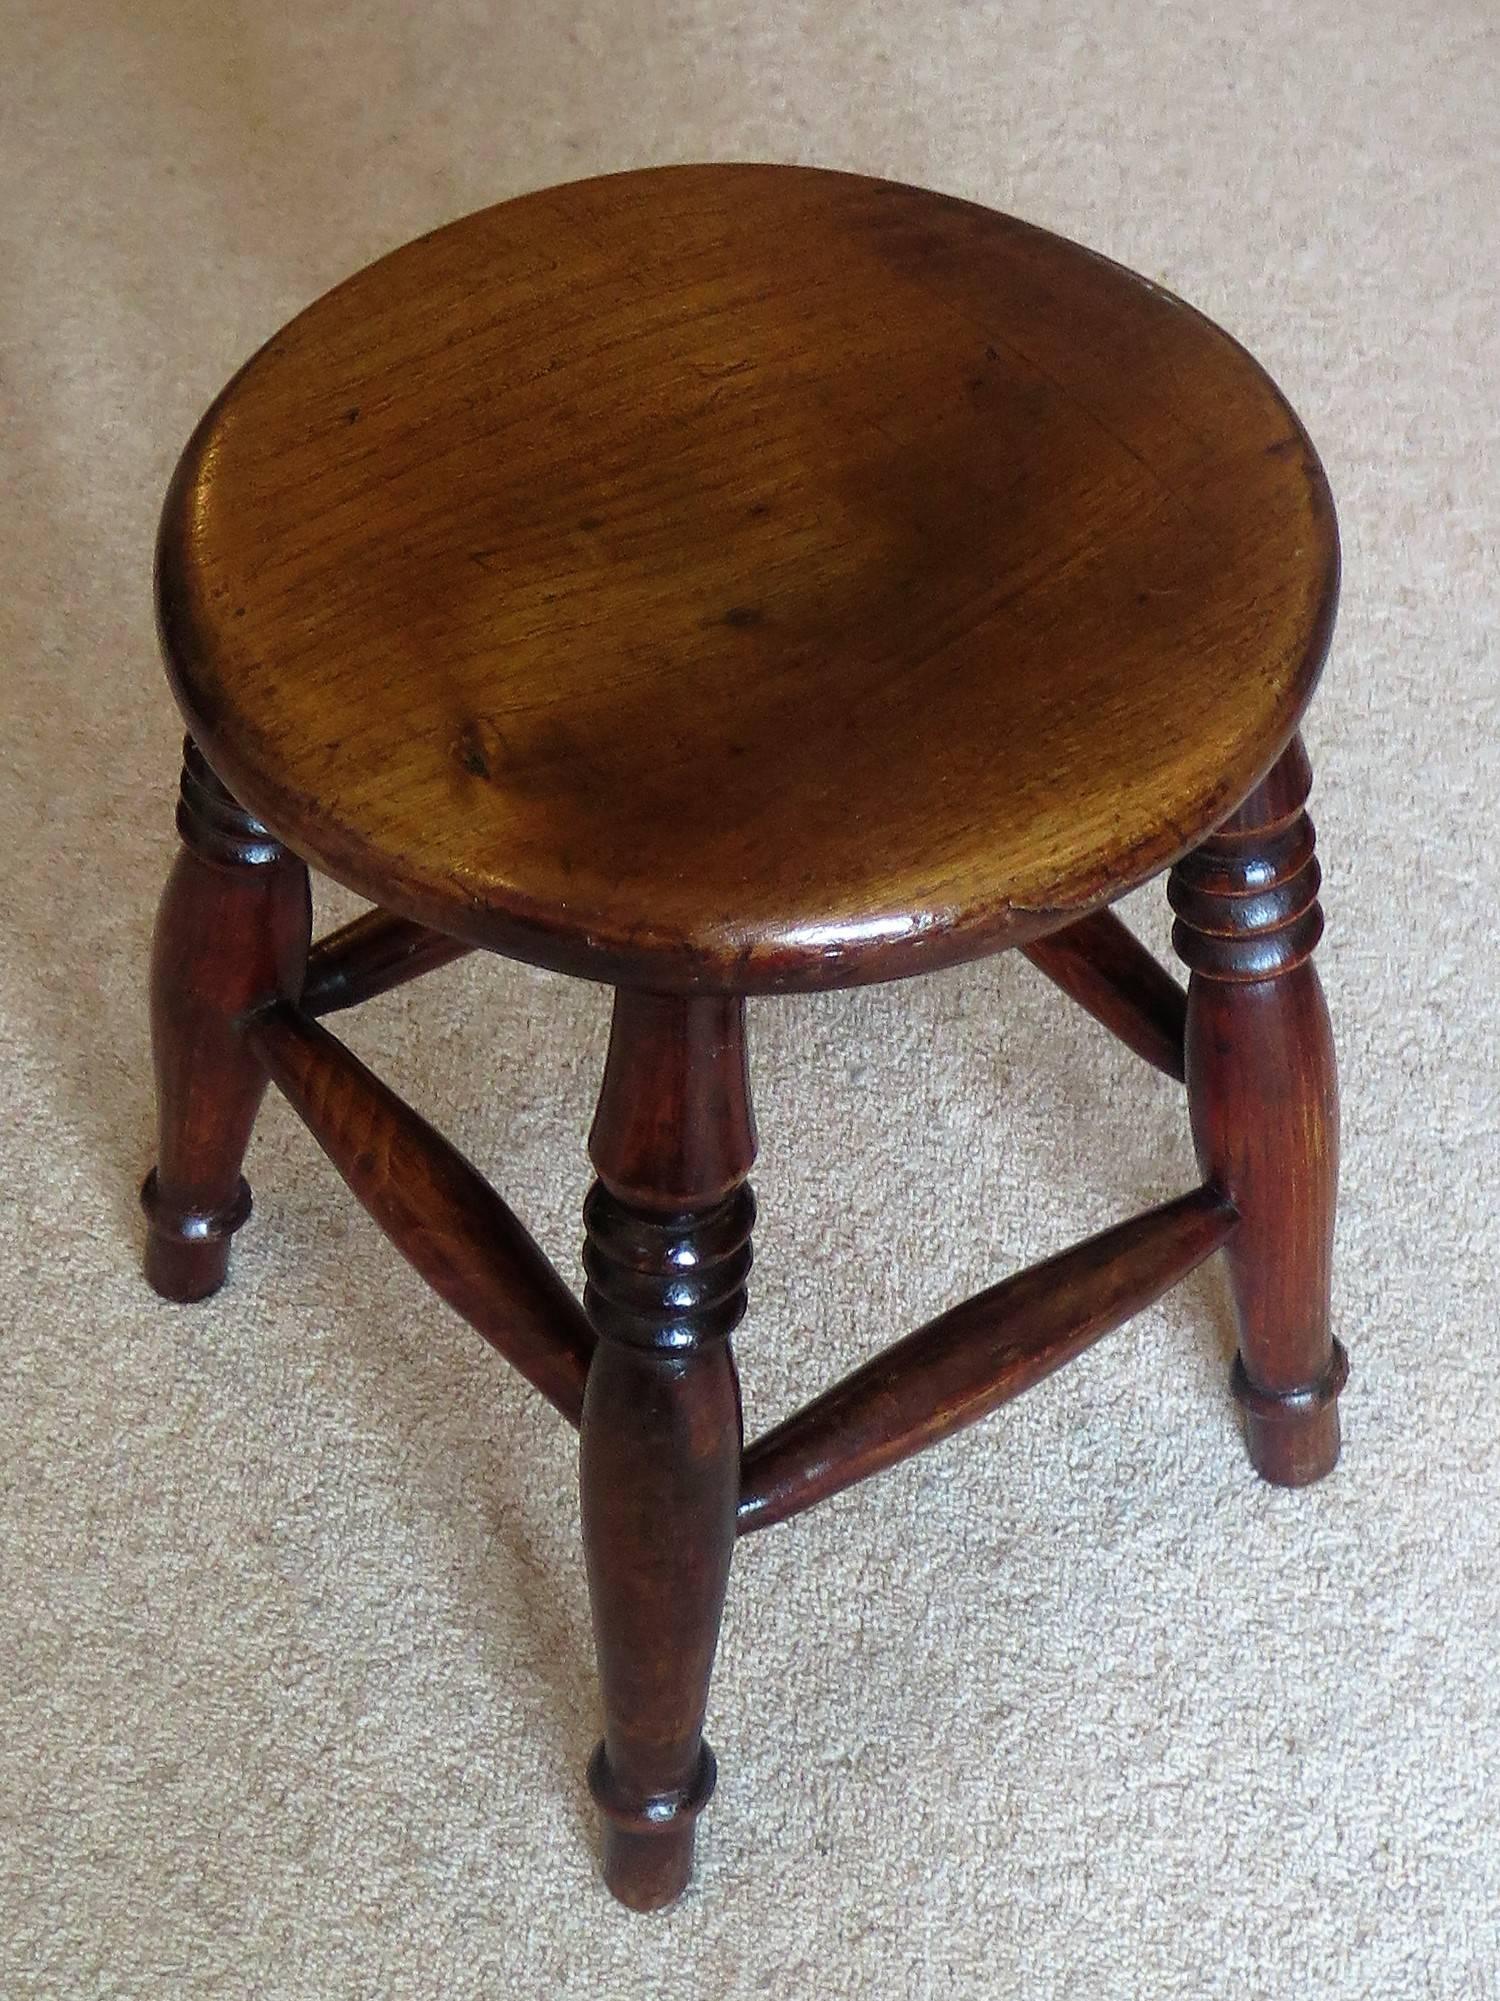 Hand-Crafted Elm Stool or Stand North East Yorkshire English Maker, Circa 1850 For Sale